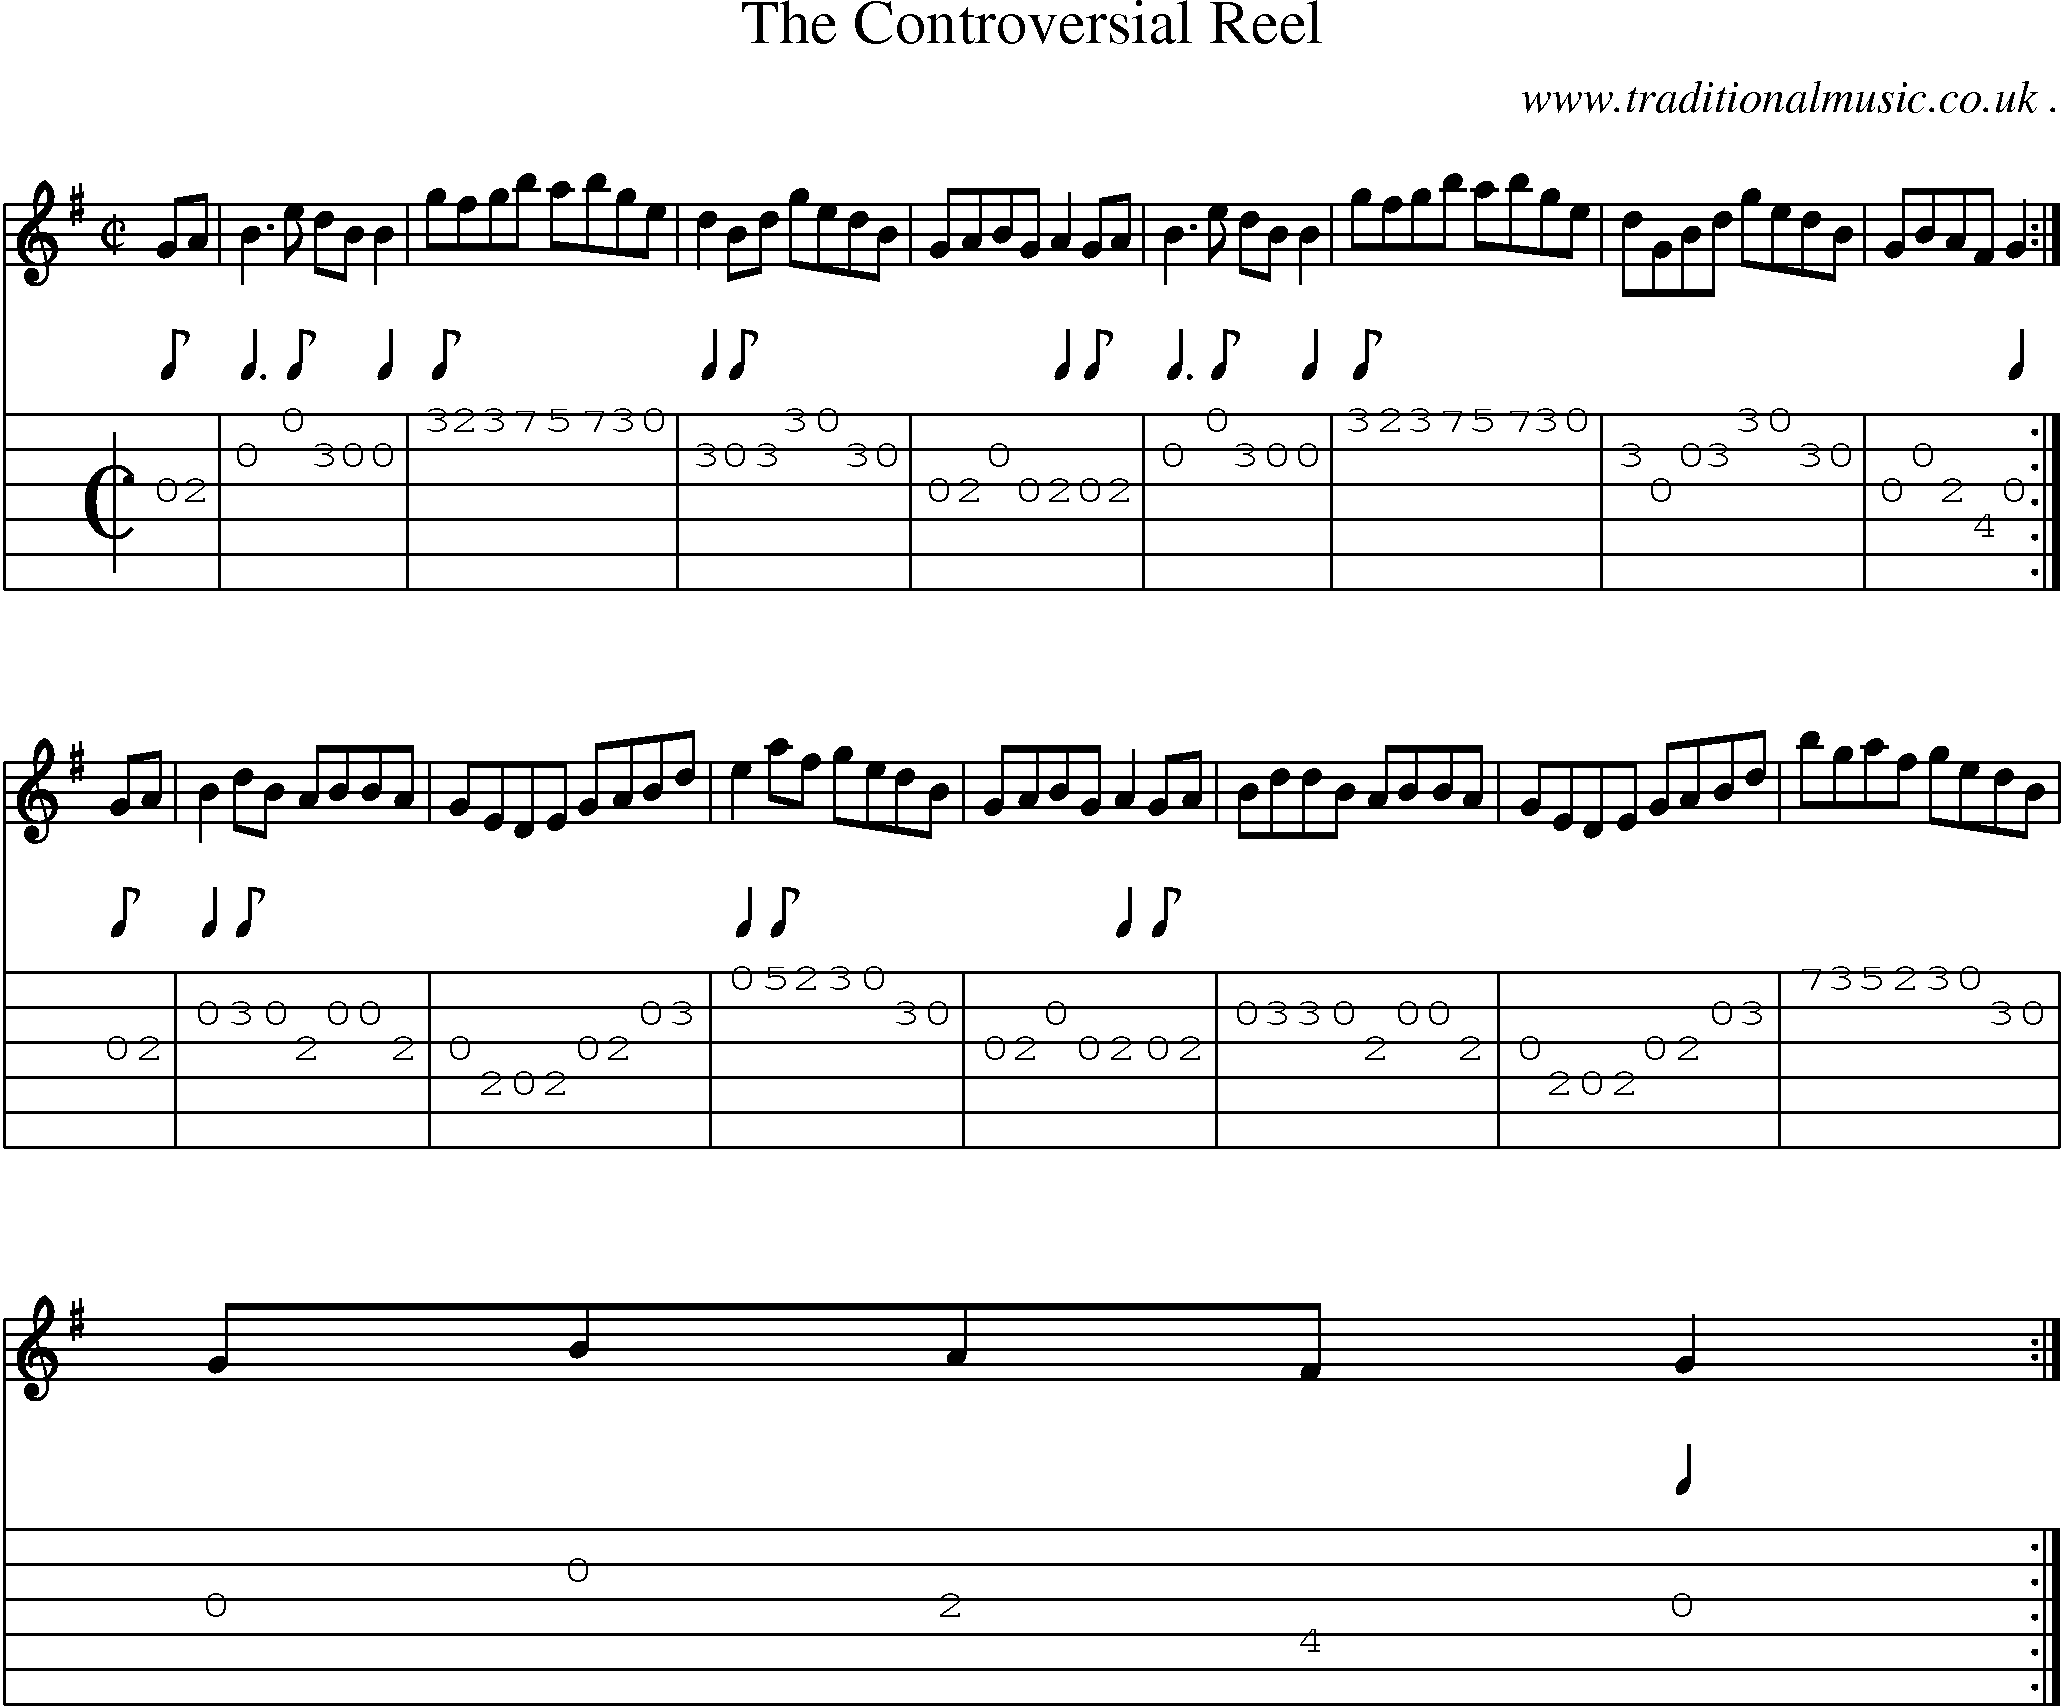 Sheet-Music and Guitar Tabs for The Controversial Reel